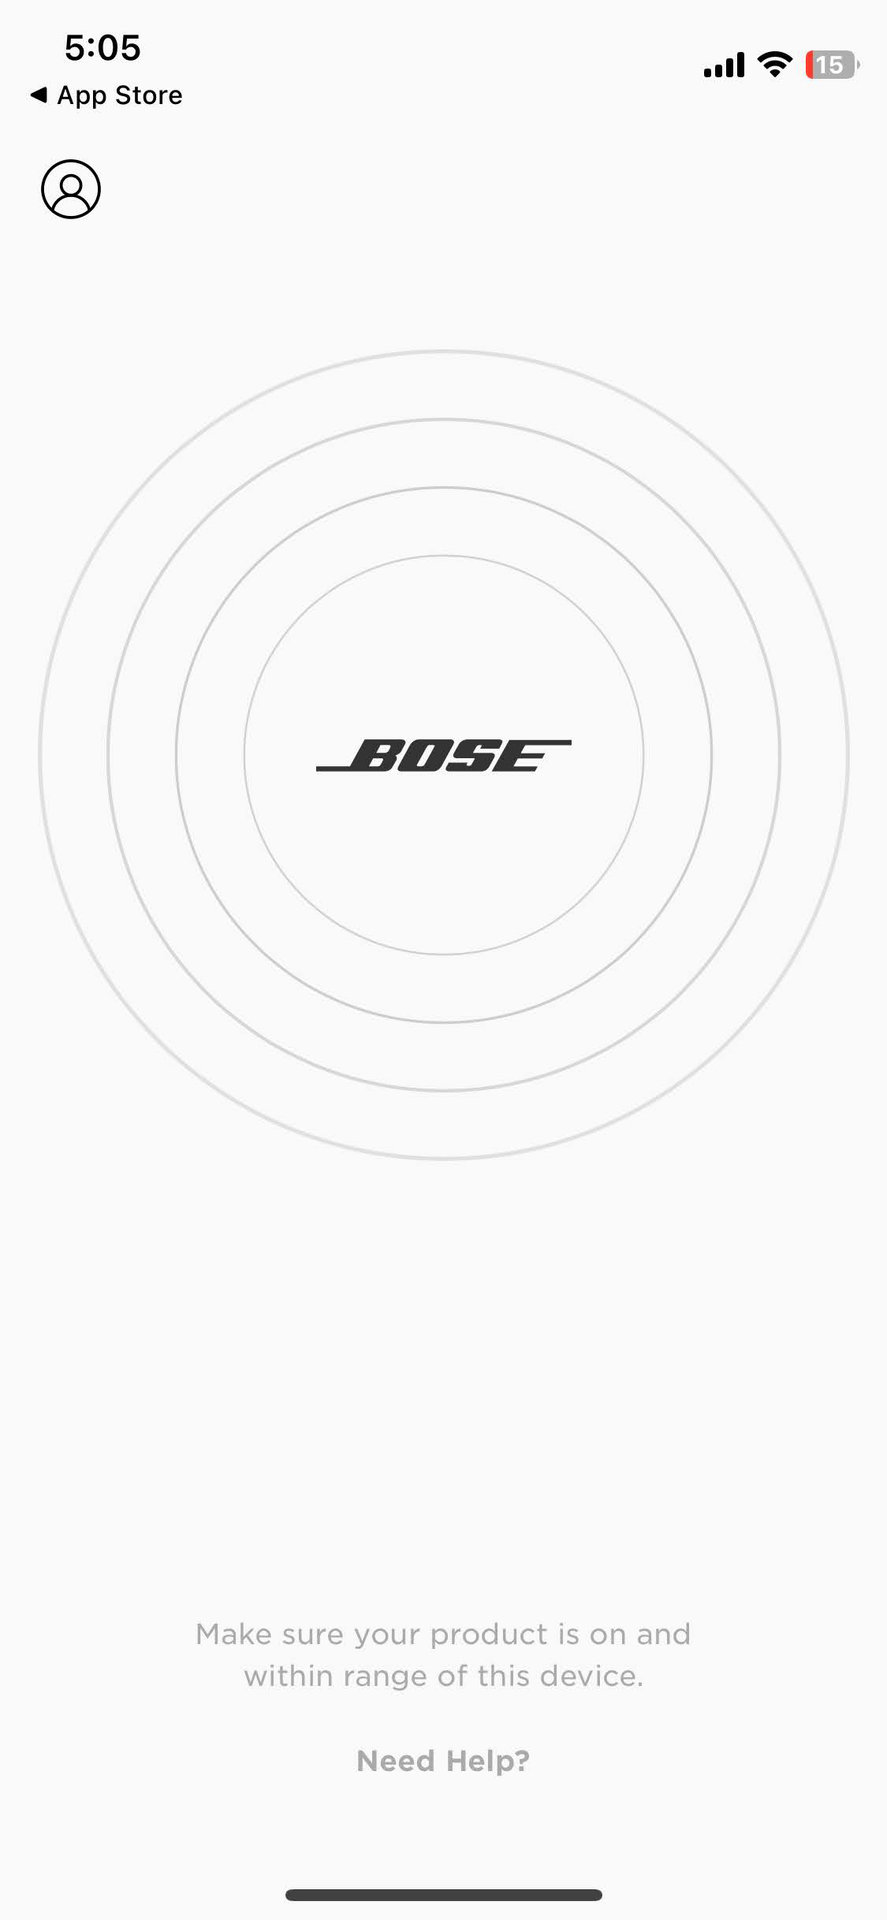 How to pair Bose headphones to an iPhone by using the Bose Connect app (2)